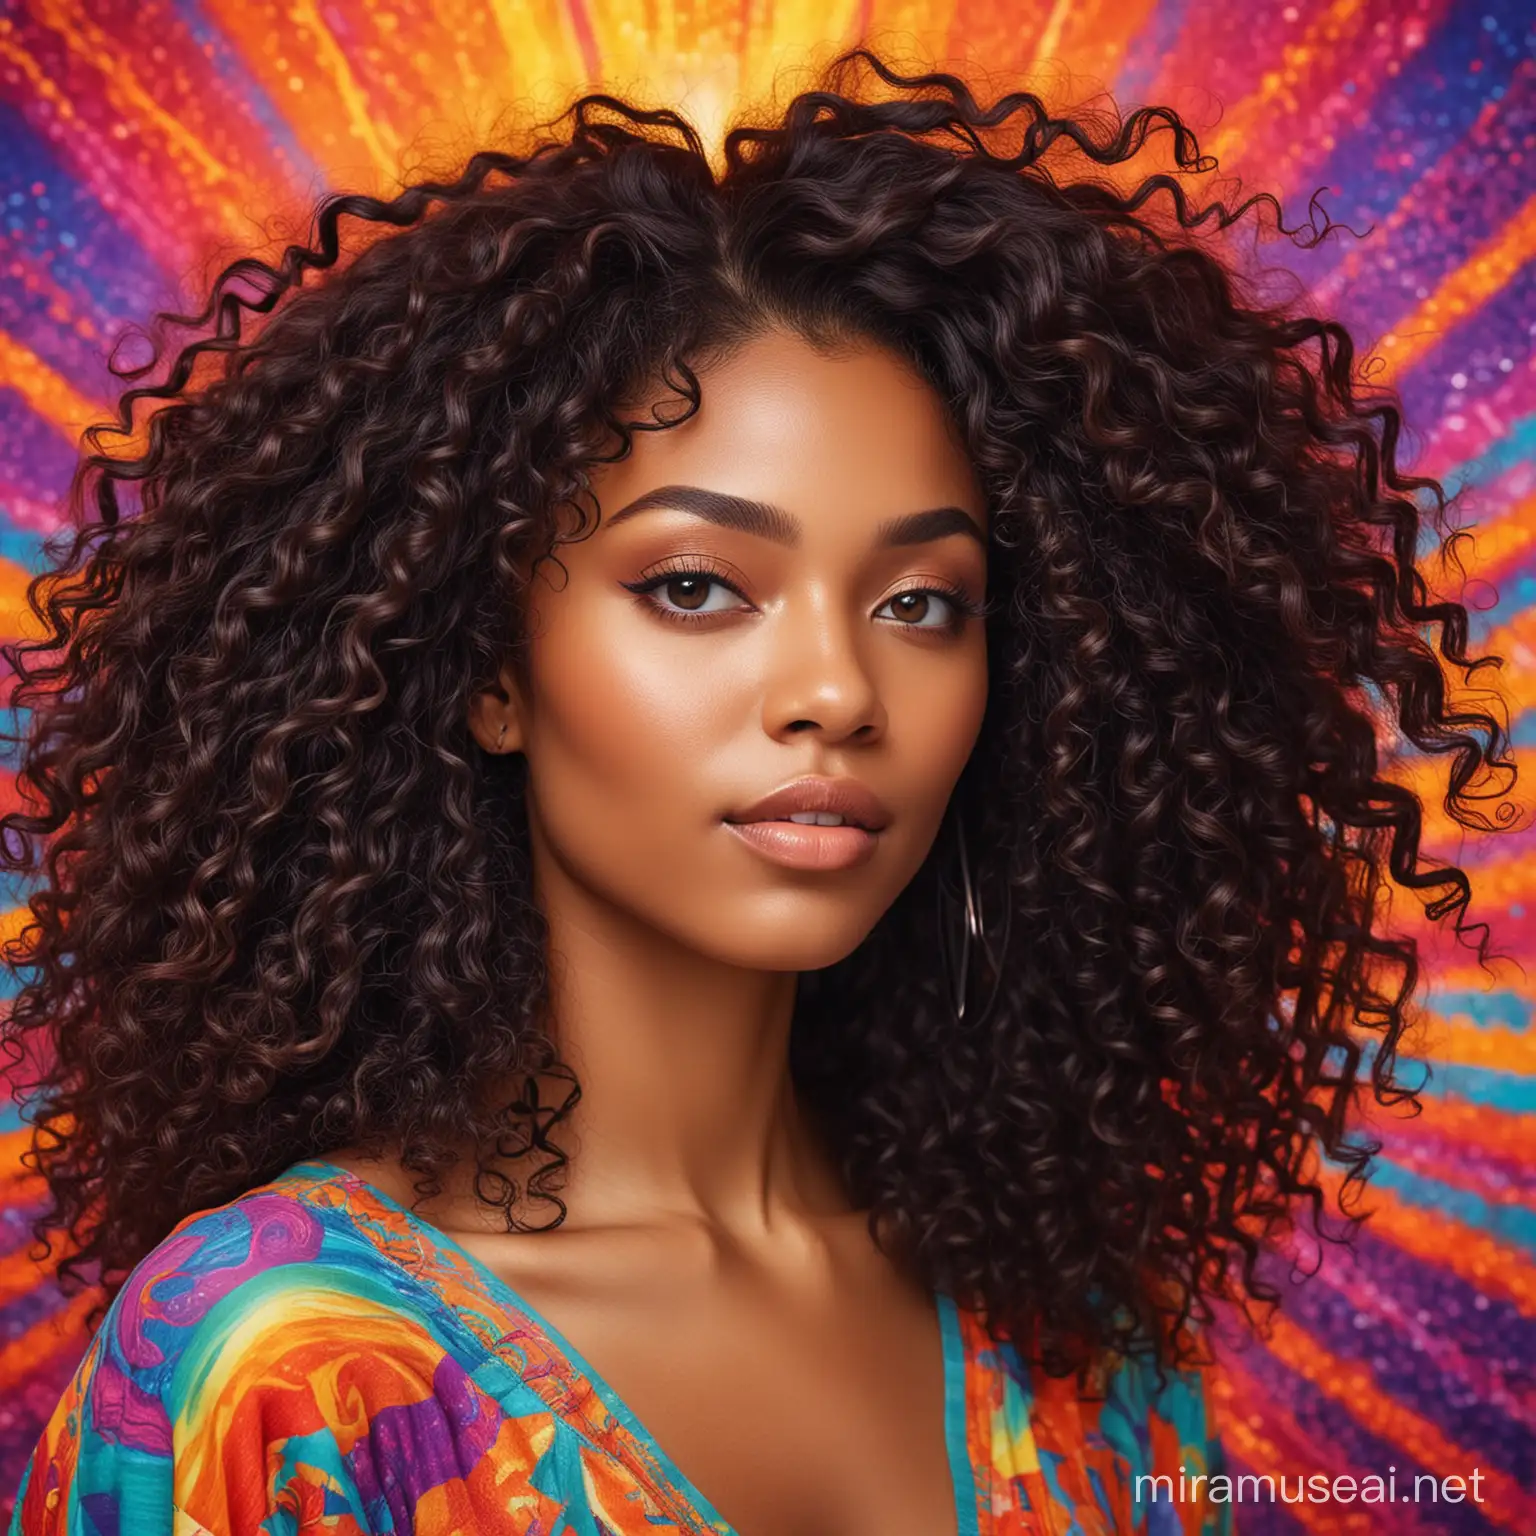 Stunning AfroLatina Woman with Vibrant Curly Hair in Psychedelic Landscape